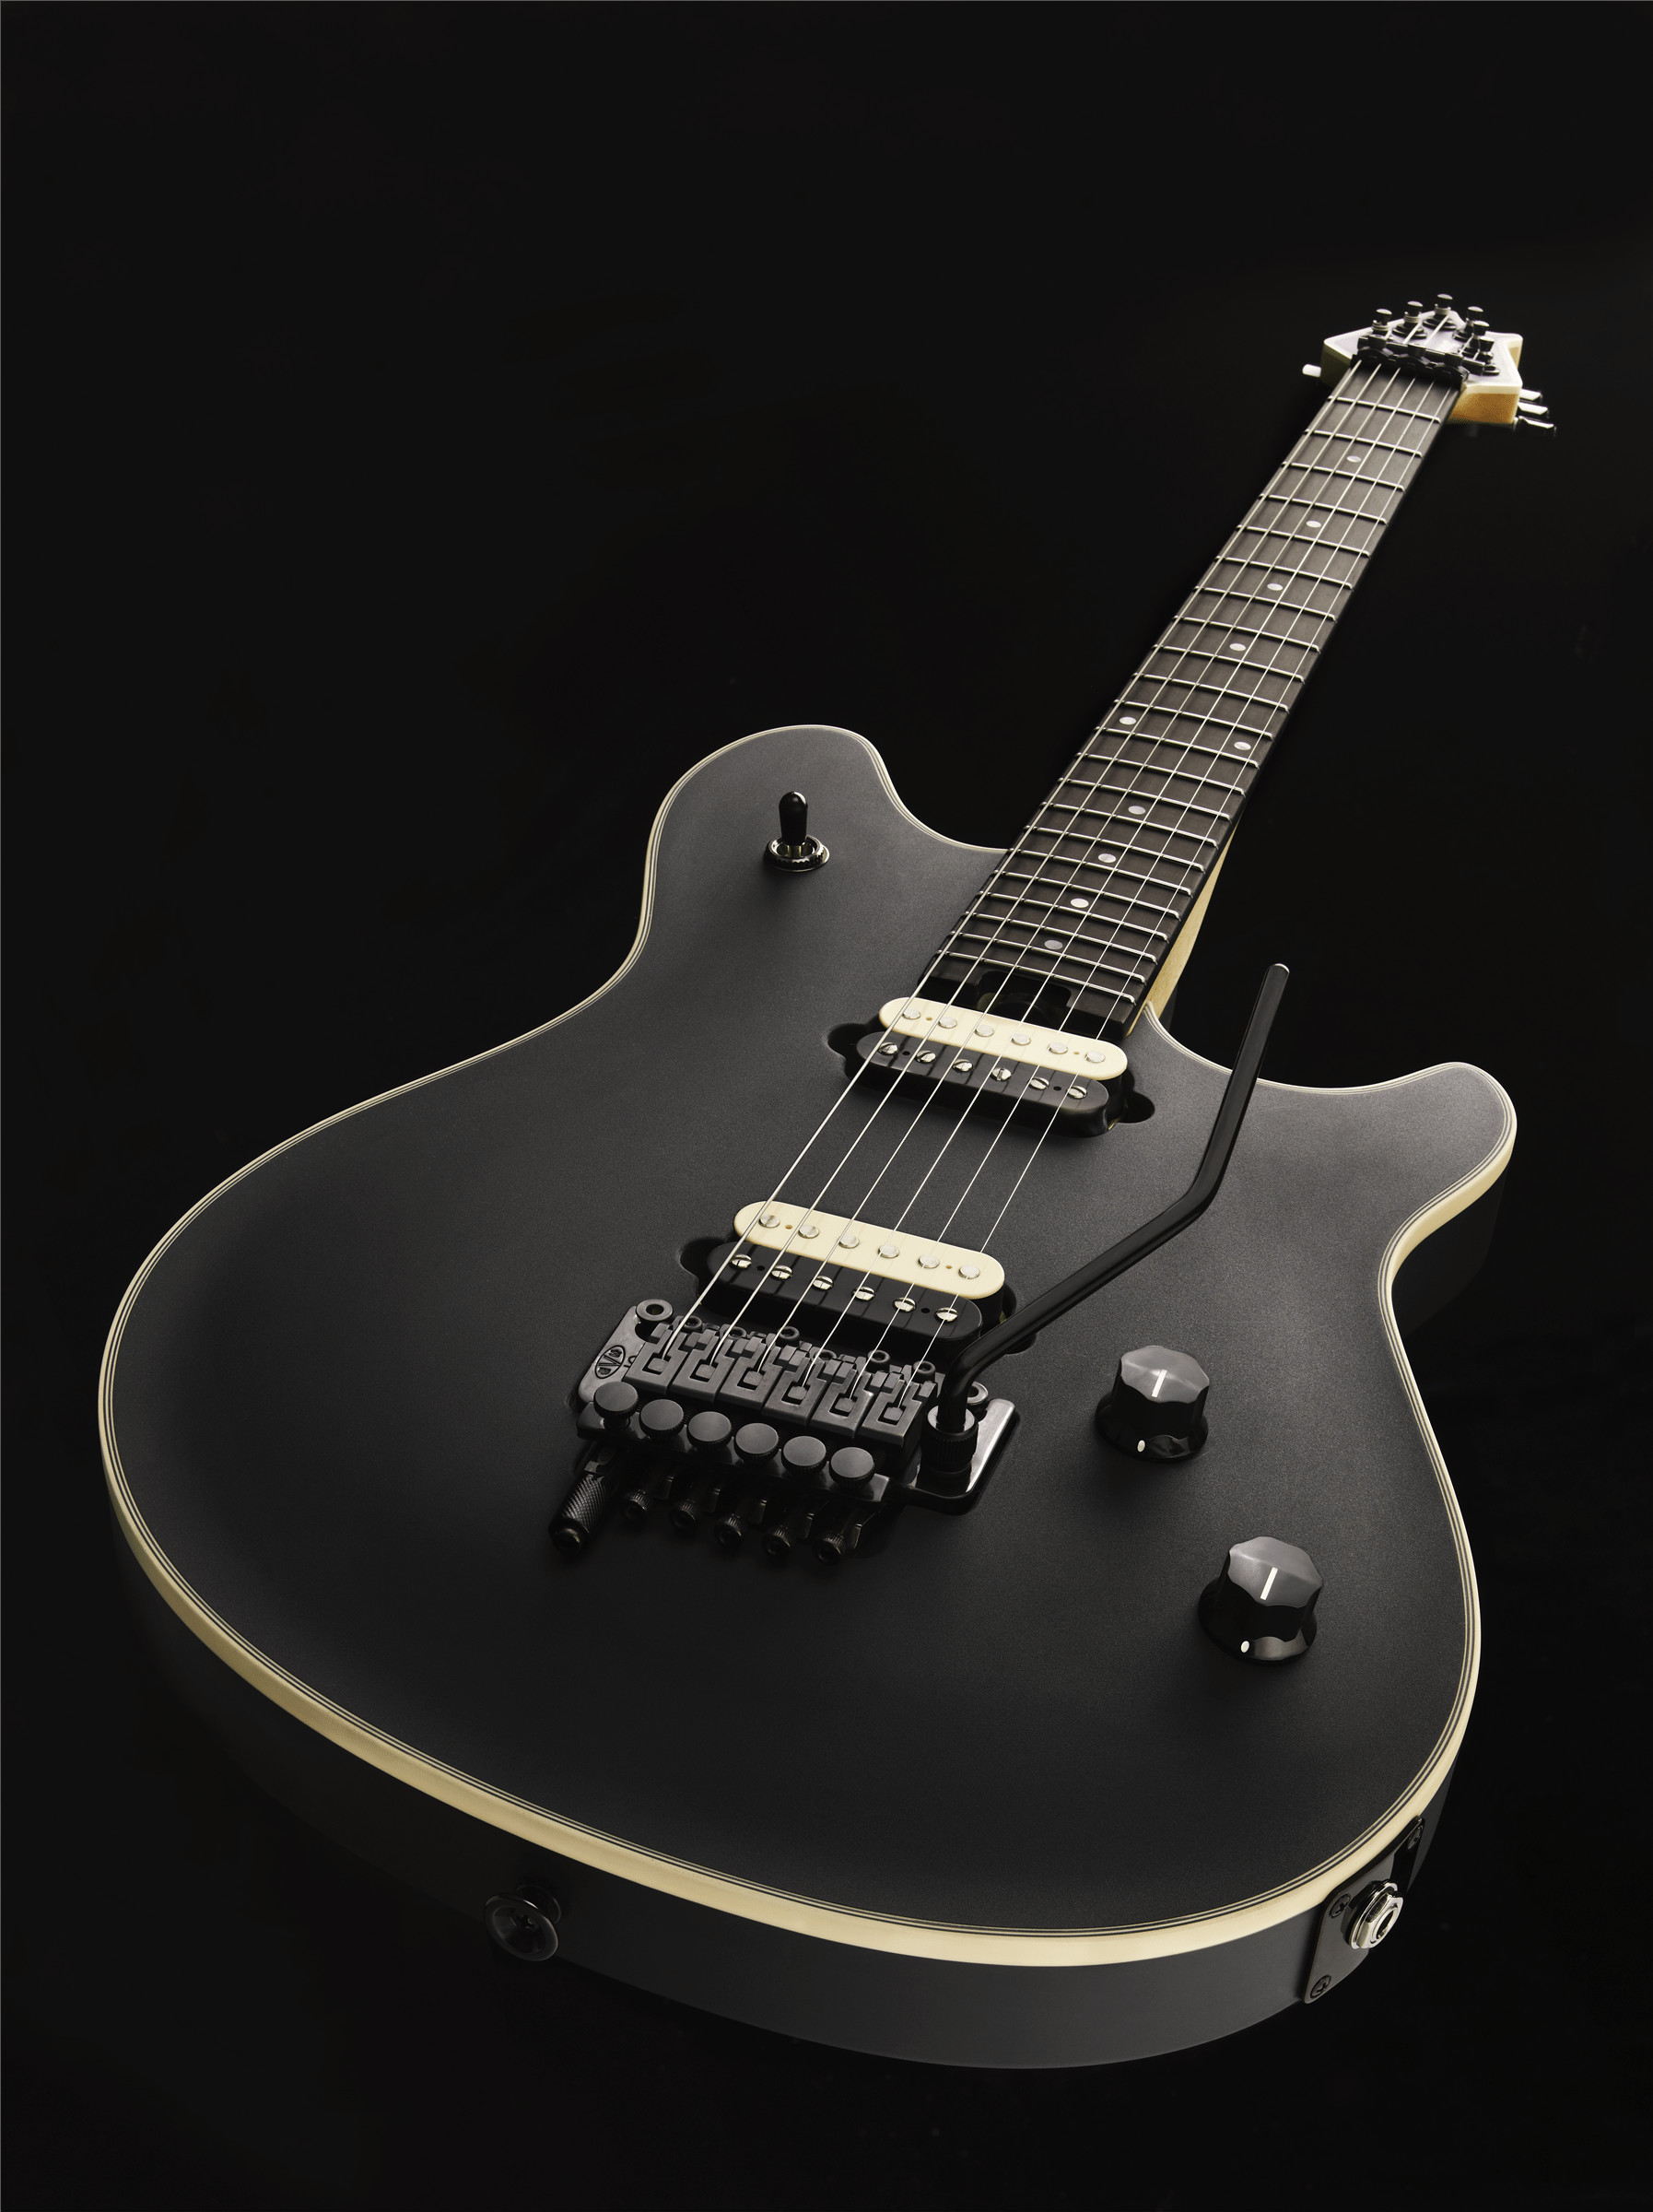 1794x2400 For the new Van Halen record, Eddie Van Halen used the latest in EVH  Wolfgang guitars, an EVH USA Wolfgang Stealth which sounds loud and  powerful as it does ...